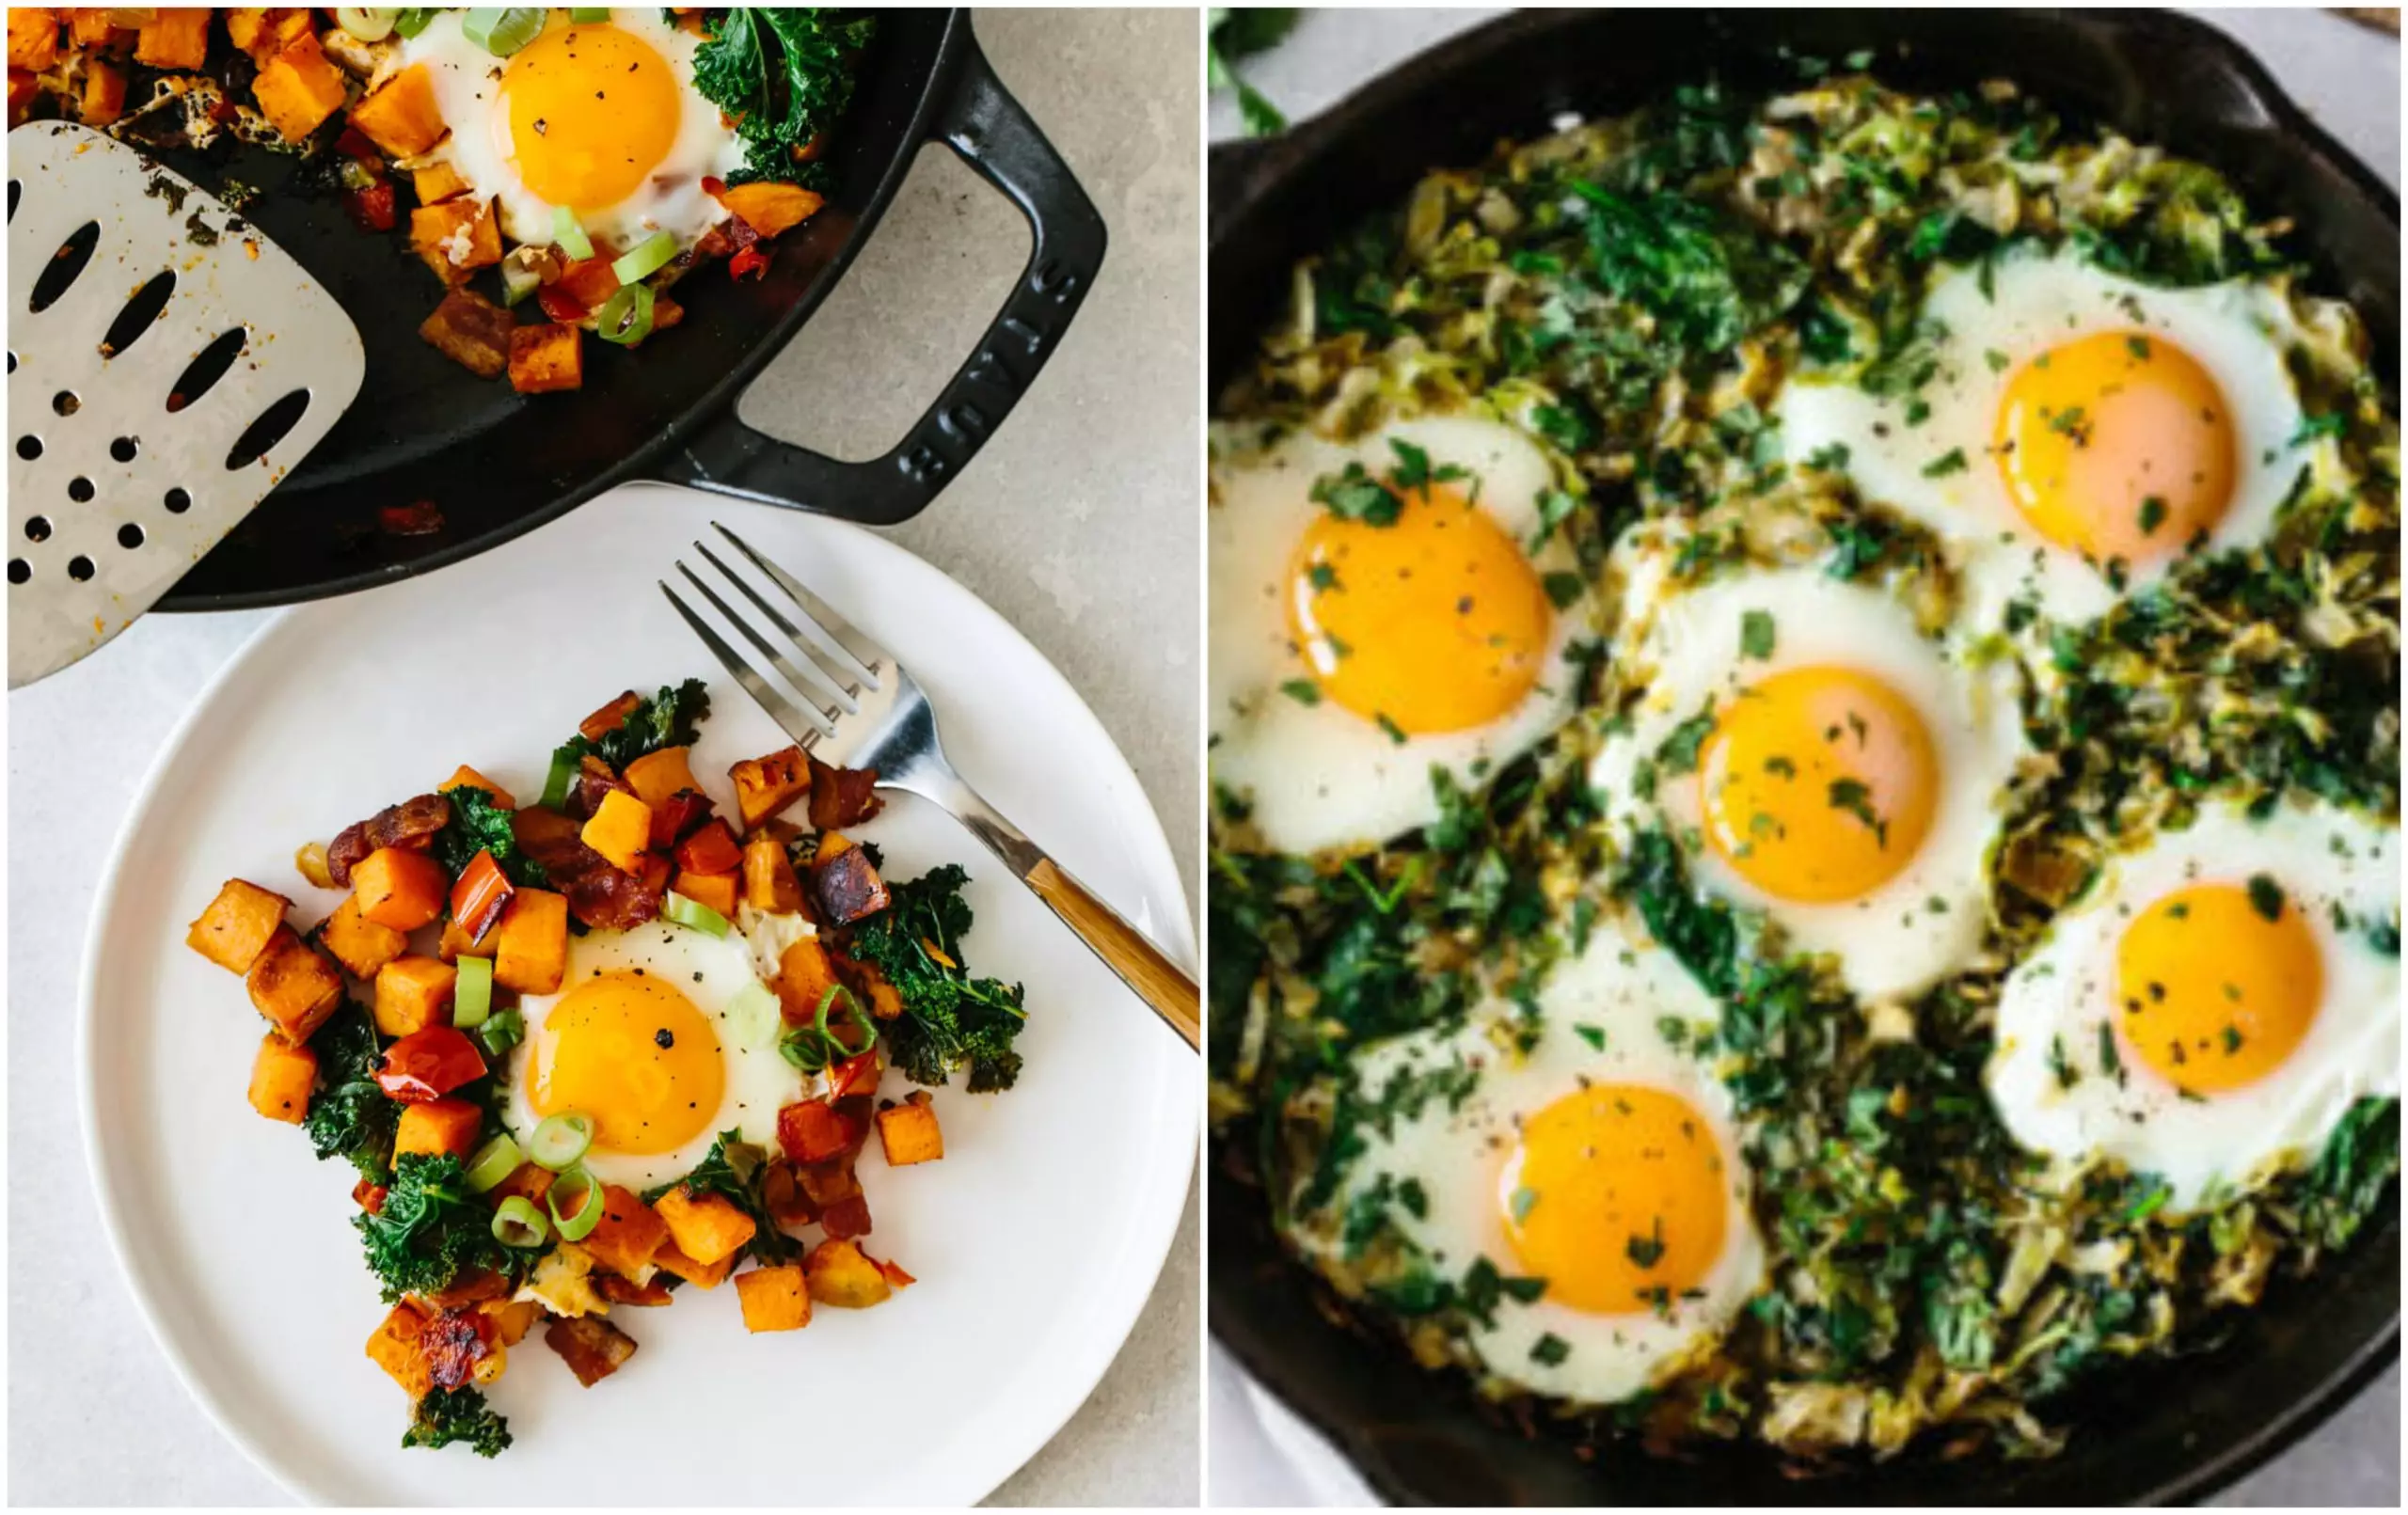 Delicious Breakfast Recipes You Need To Try - World inside pictures